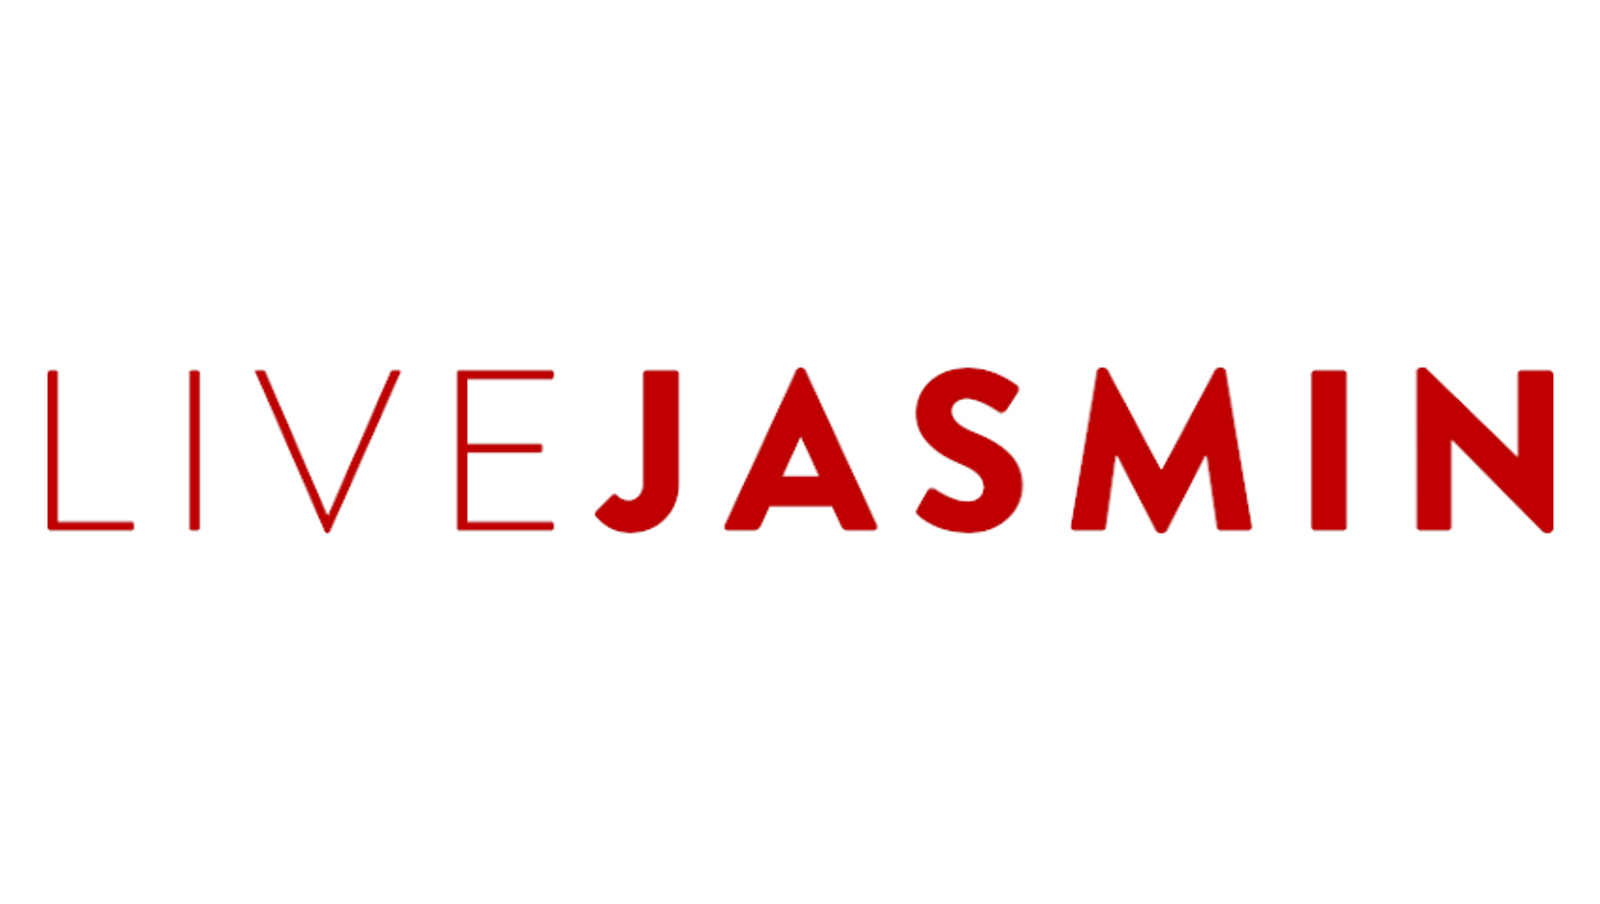 LiveJasmin Expands Service With Lesbian & Straight Couples